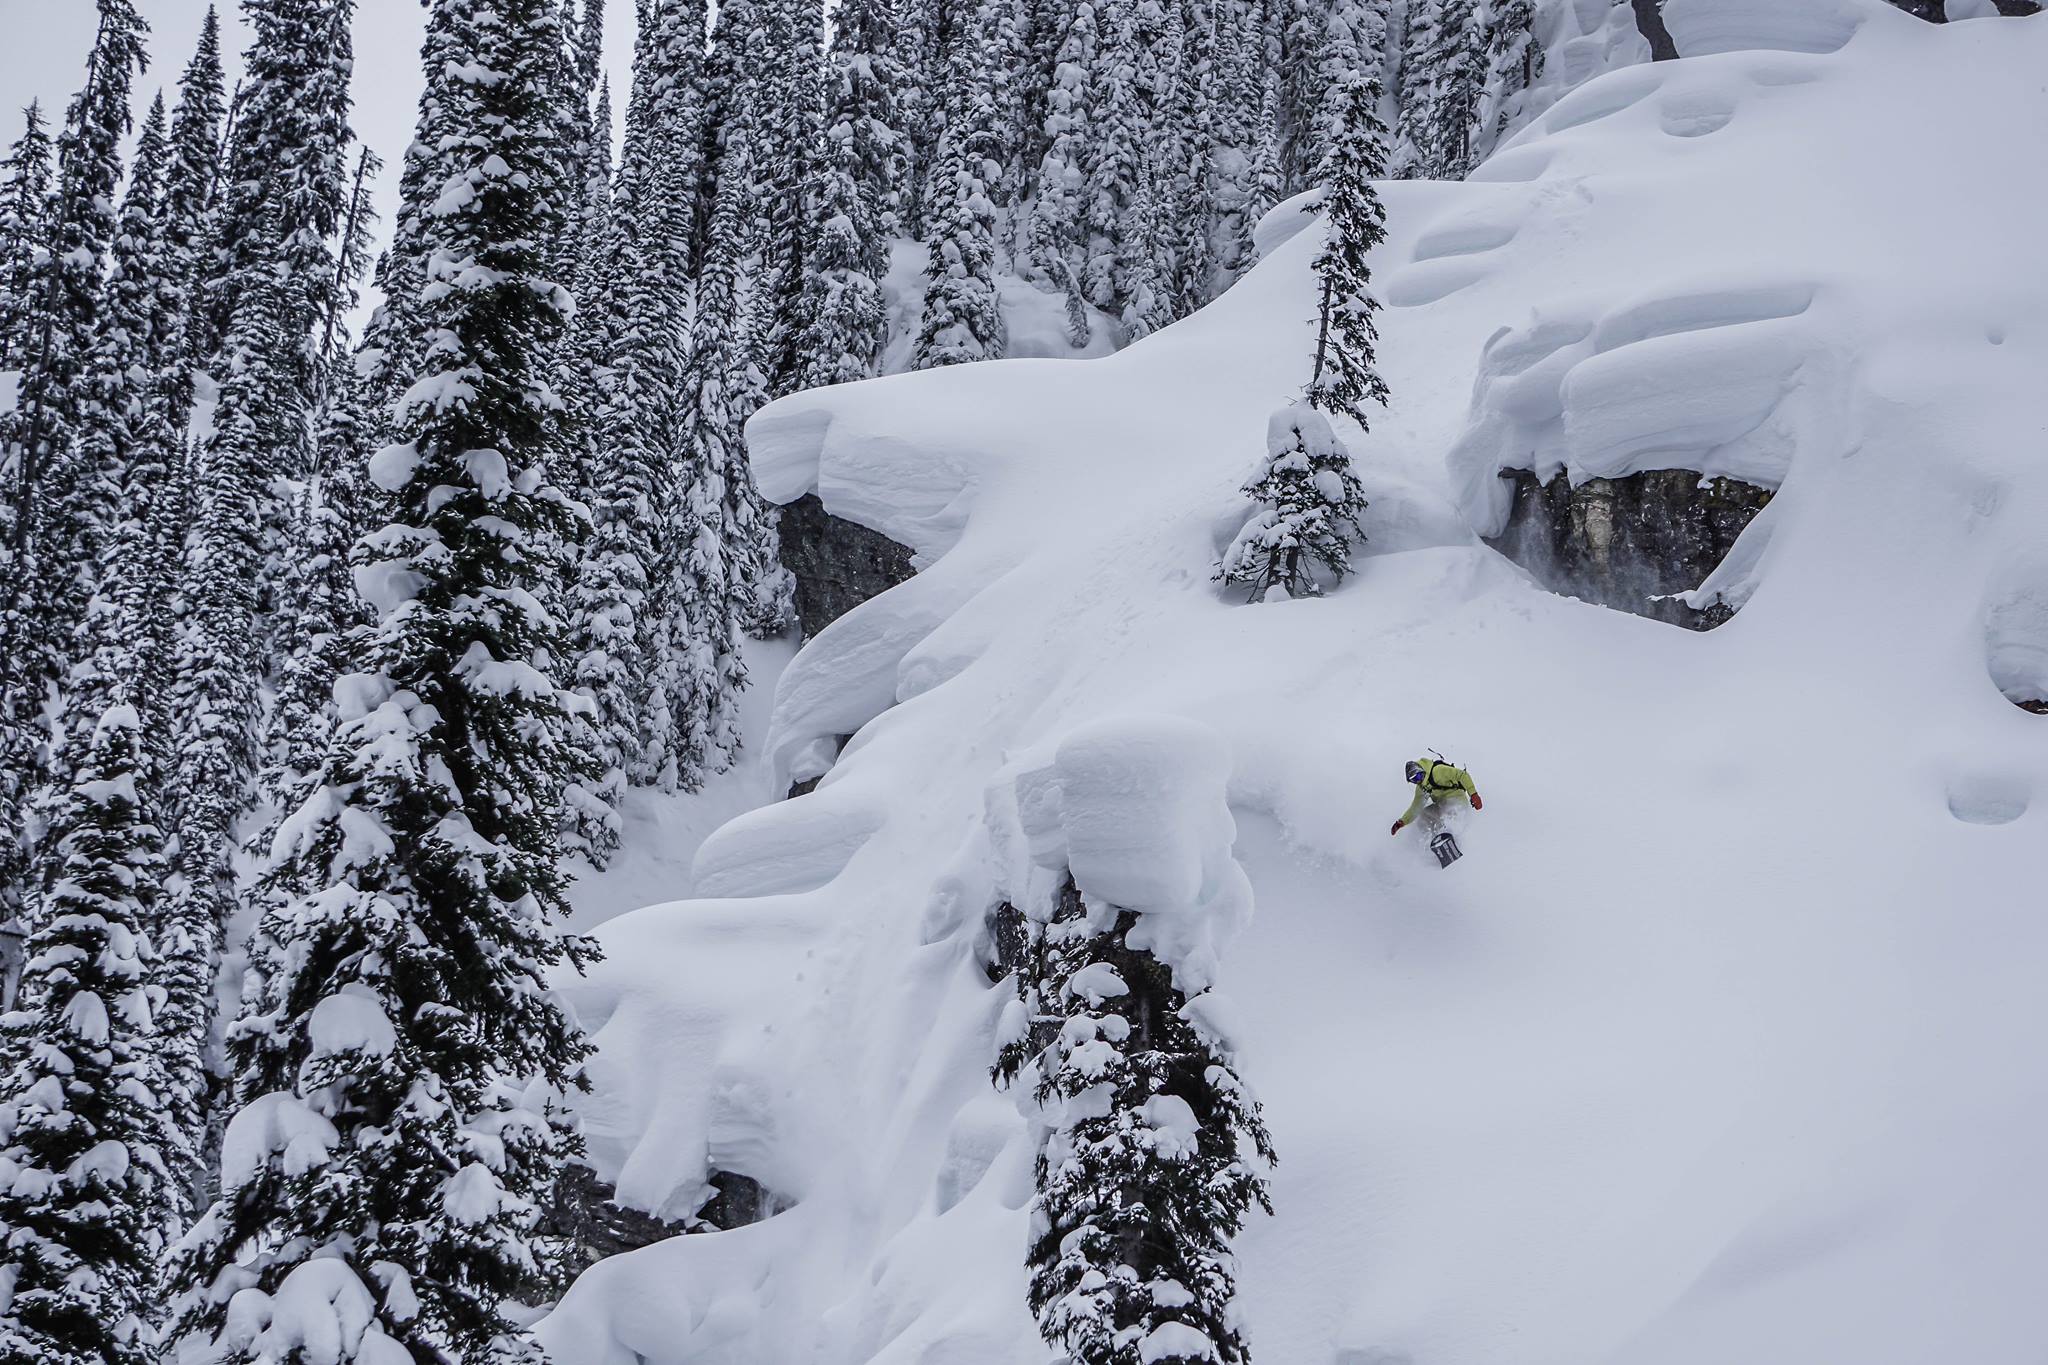 Famous for its tree skiing: BC